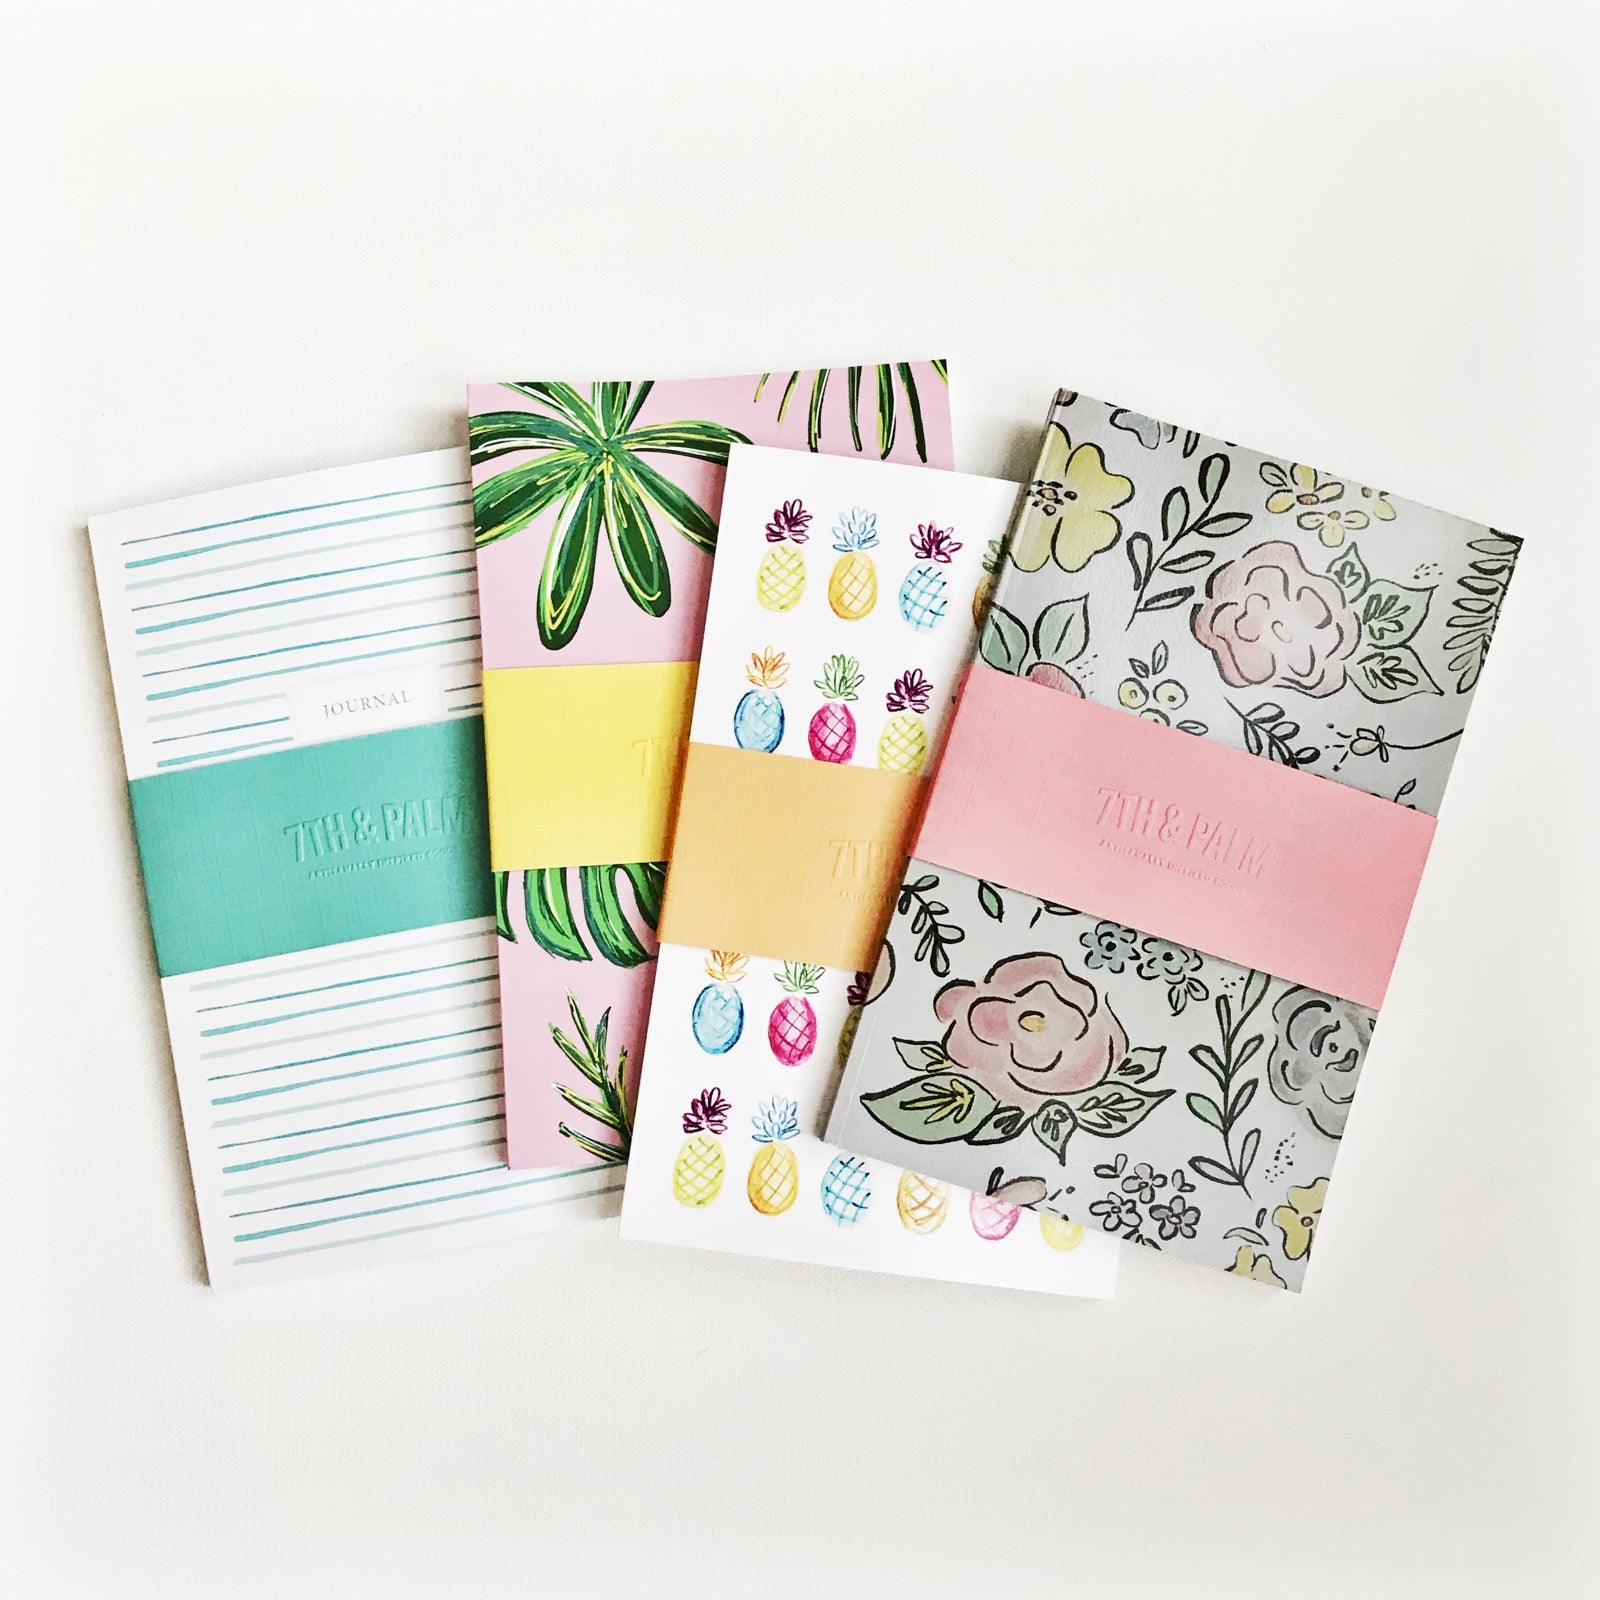 Artisanal Journals & Notebooks by 7th & Palm 